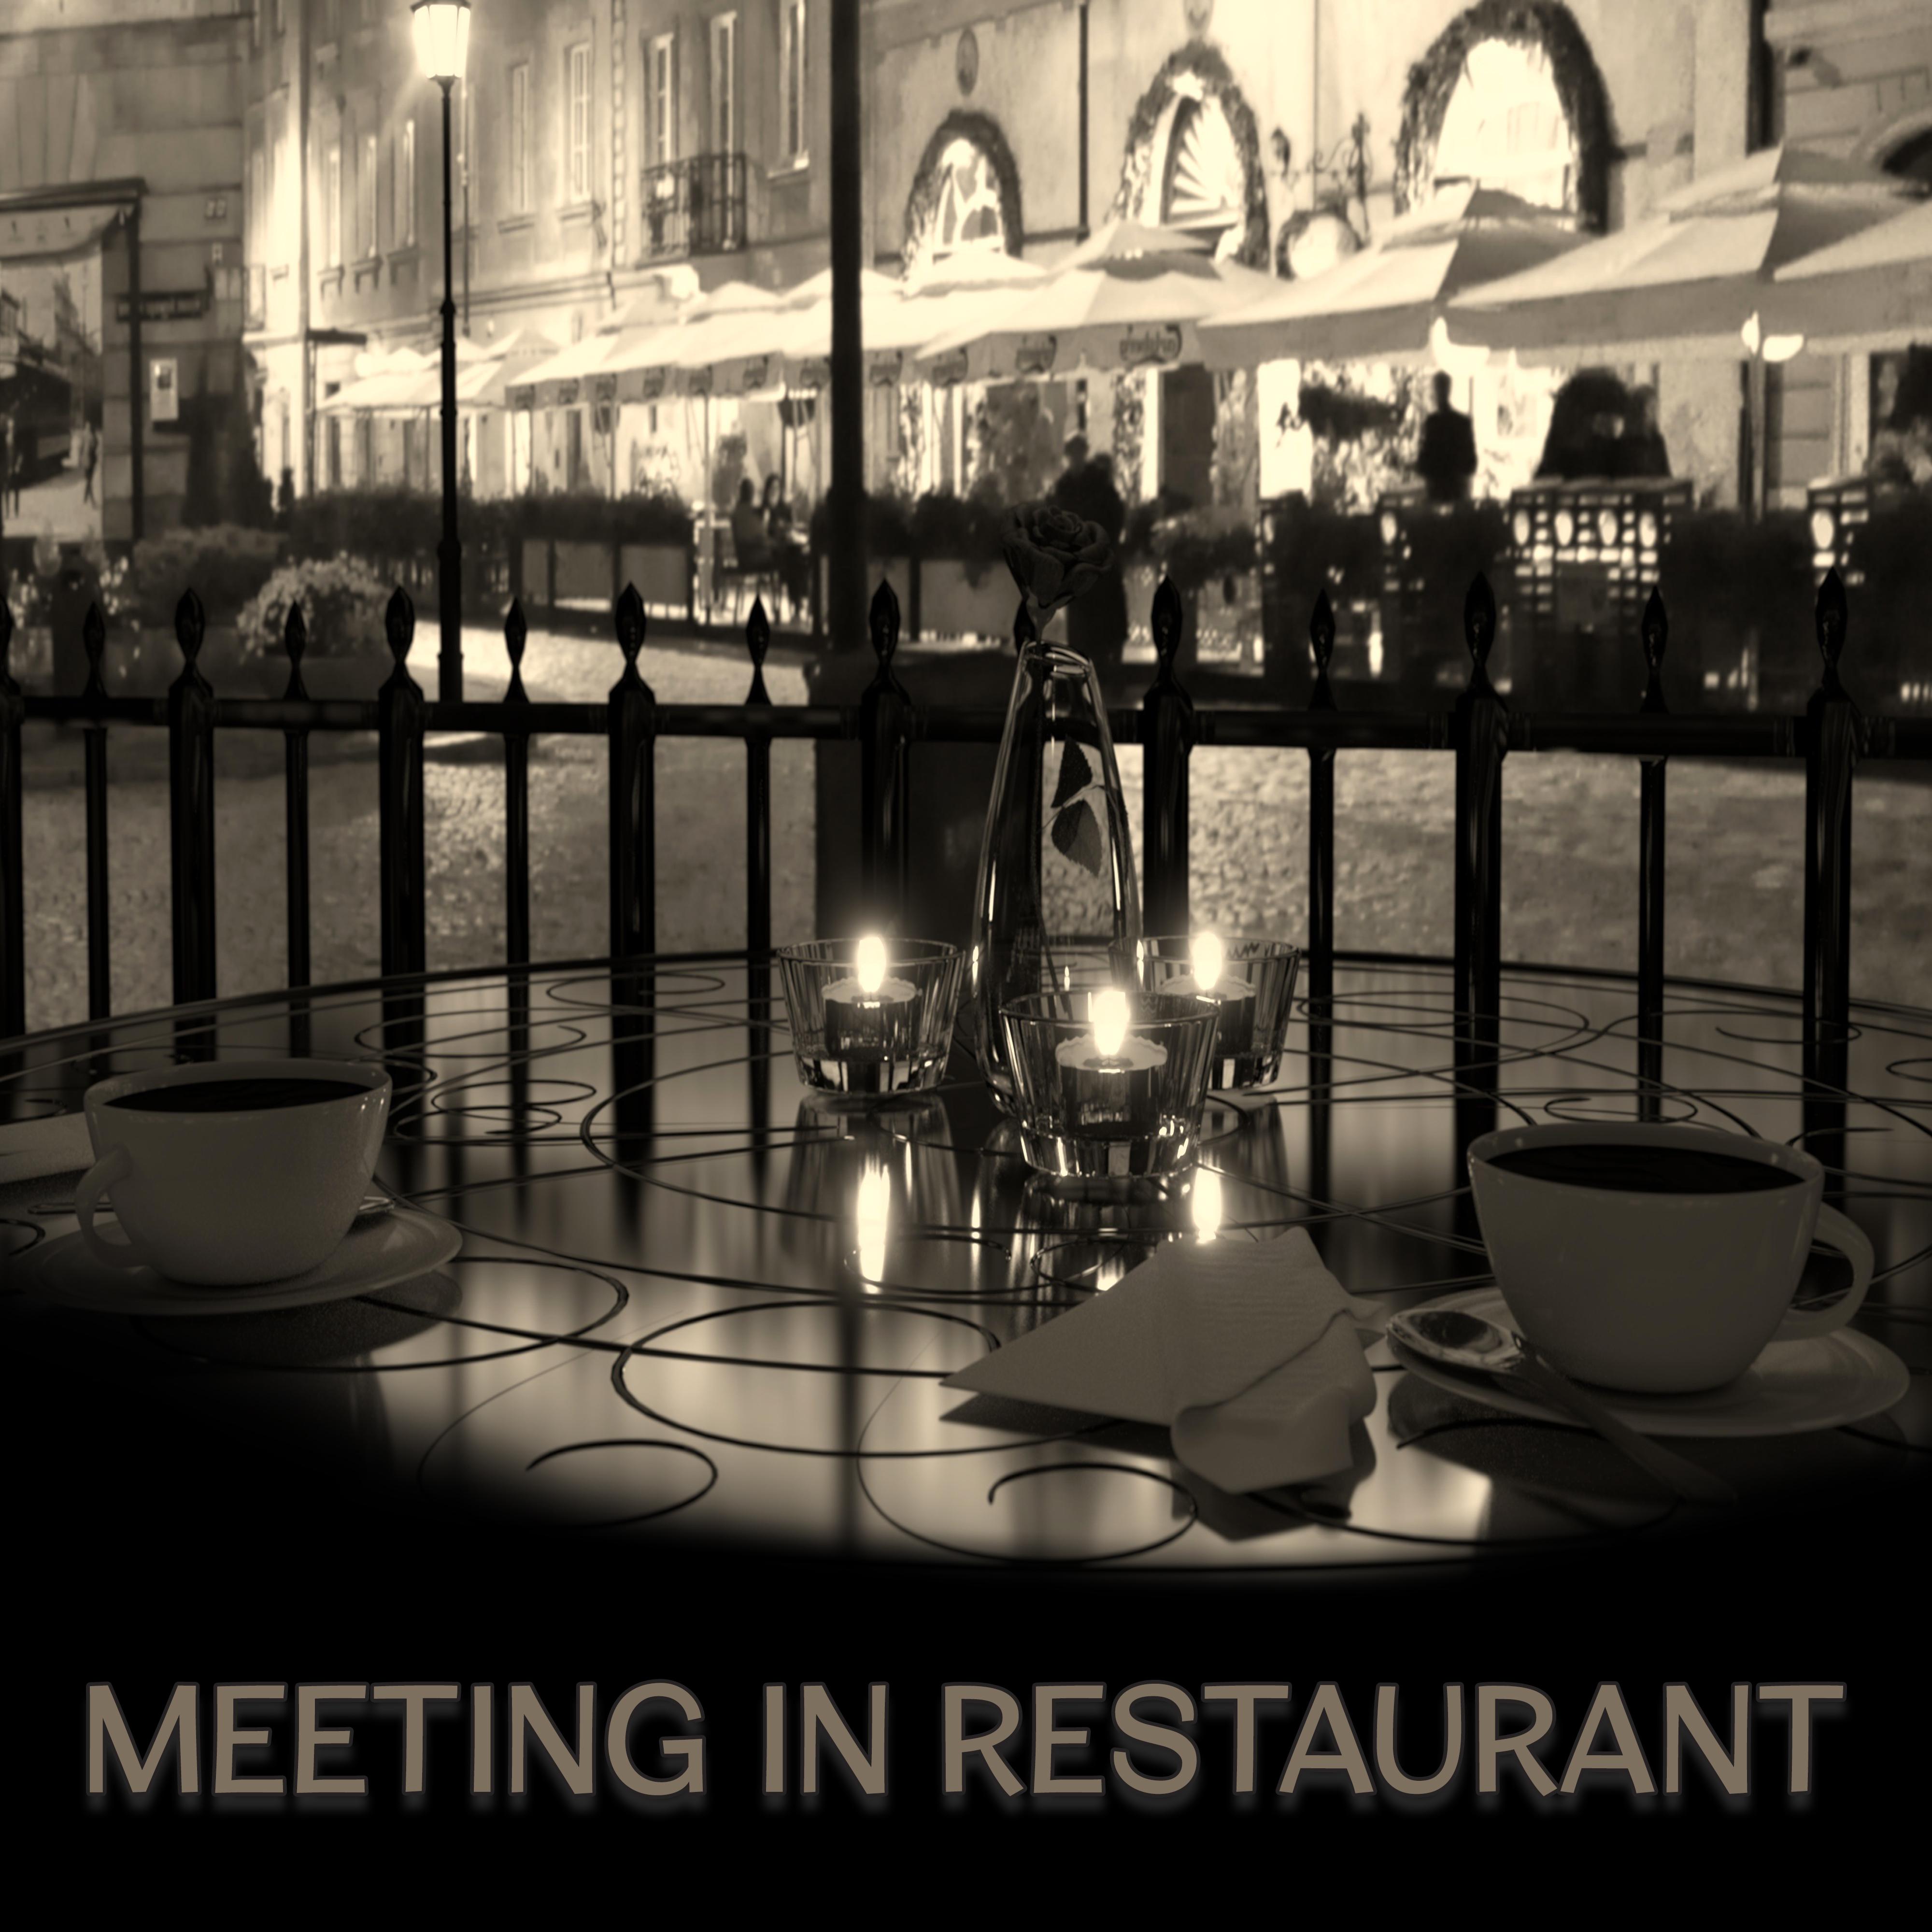 Meeting in Restaurant  Piano Bar, Restaurant Jazz Music, Dinner with Family, Relaxation Sounds, Smooth Jazz